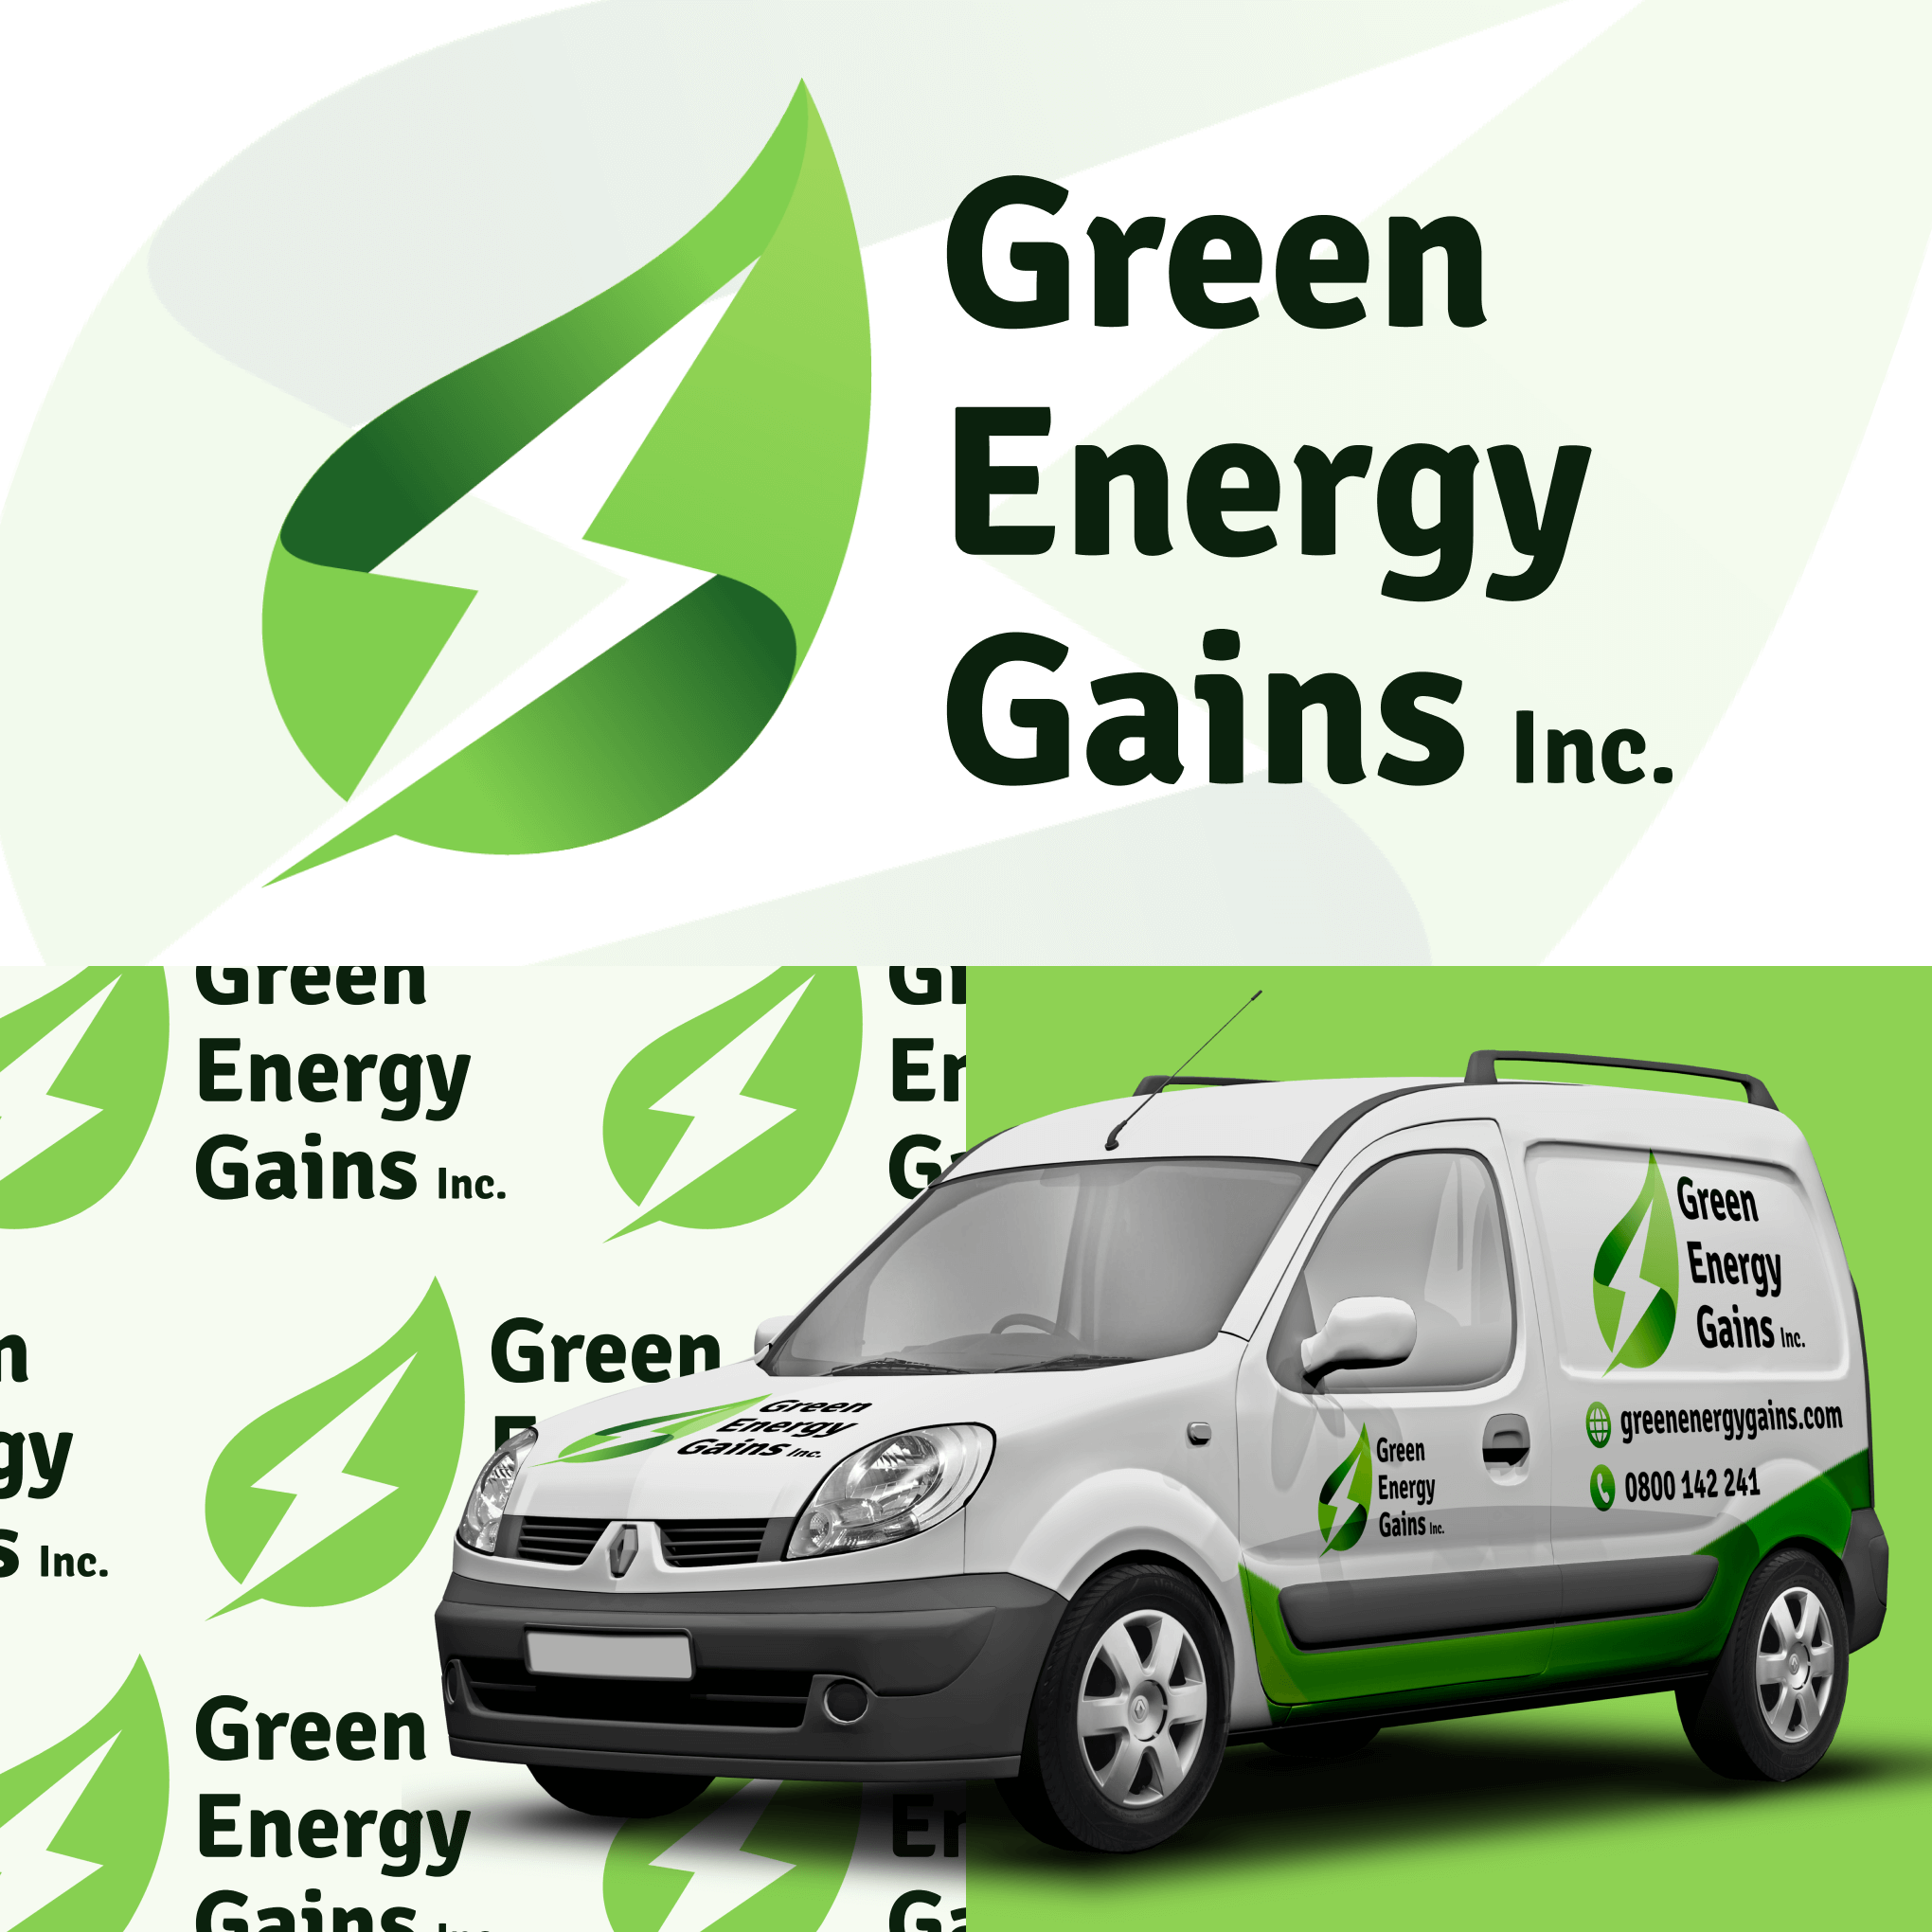 Green Energy Gains logo. It features a leaf shape with an electric bolt inside of it.